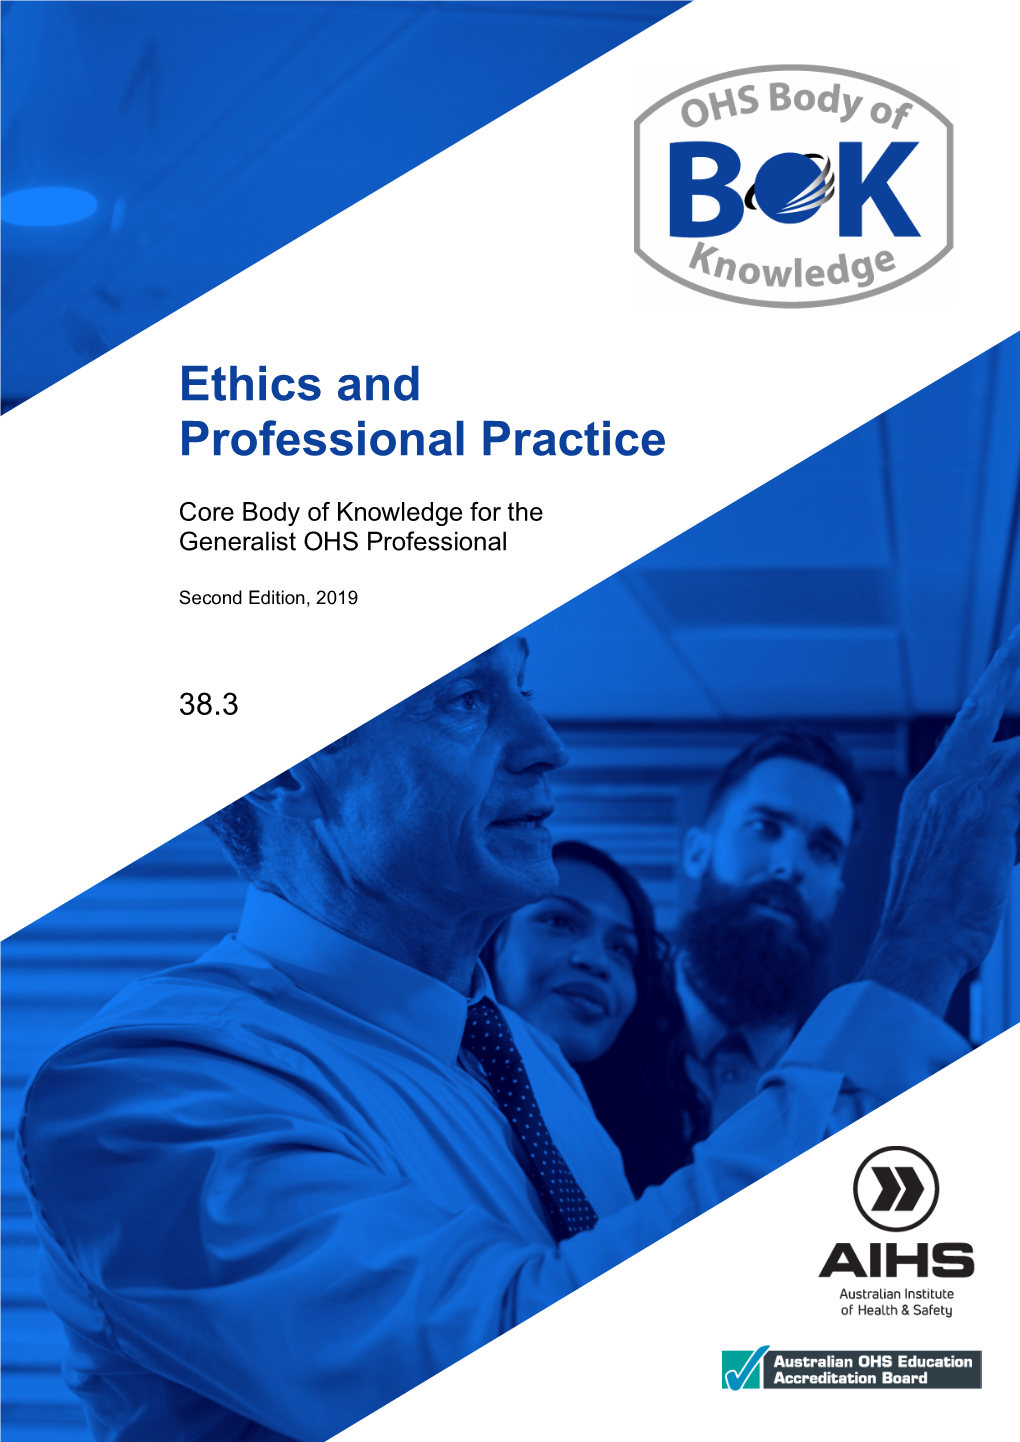 38.3. Ethics and Professional Practice